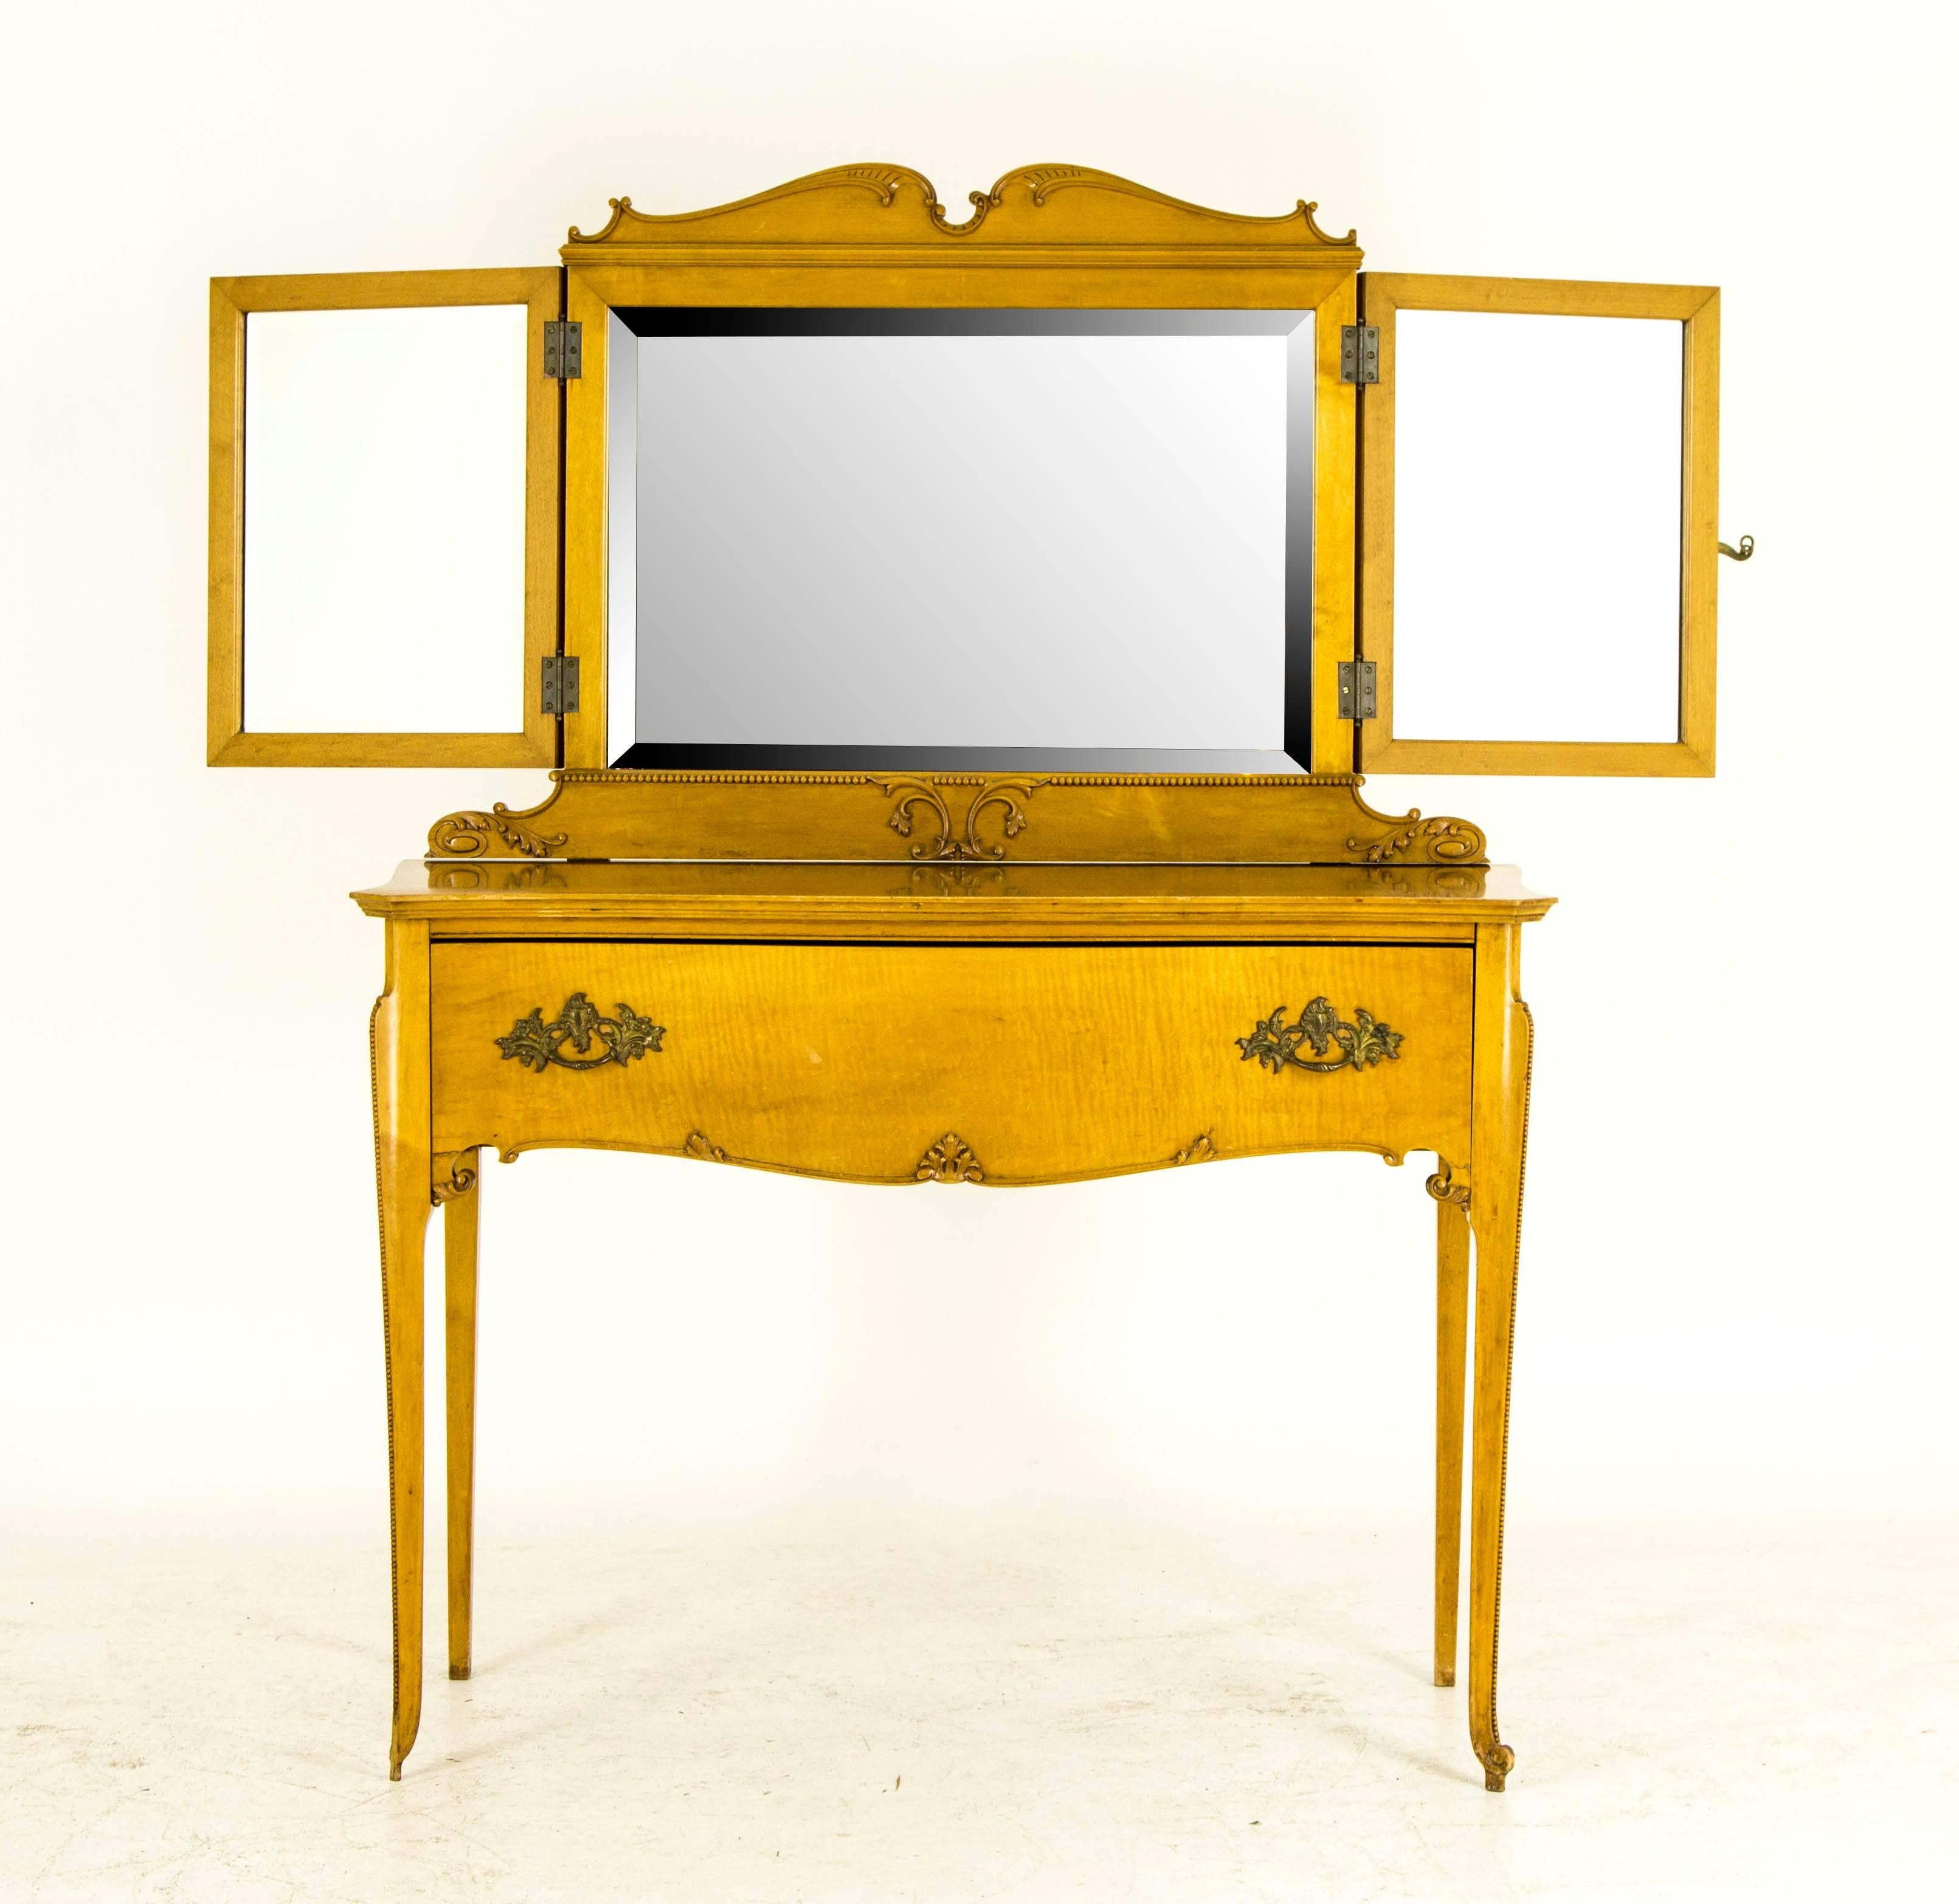 Solid tiger maple and veneers
Original finish
Applied carvings to the front of the closed top with brass fittings and clasp
Opens to reveal three framed beveled mirrors
Single long dovetailed drawer with original brass handle
Ending on tall